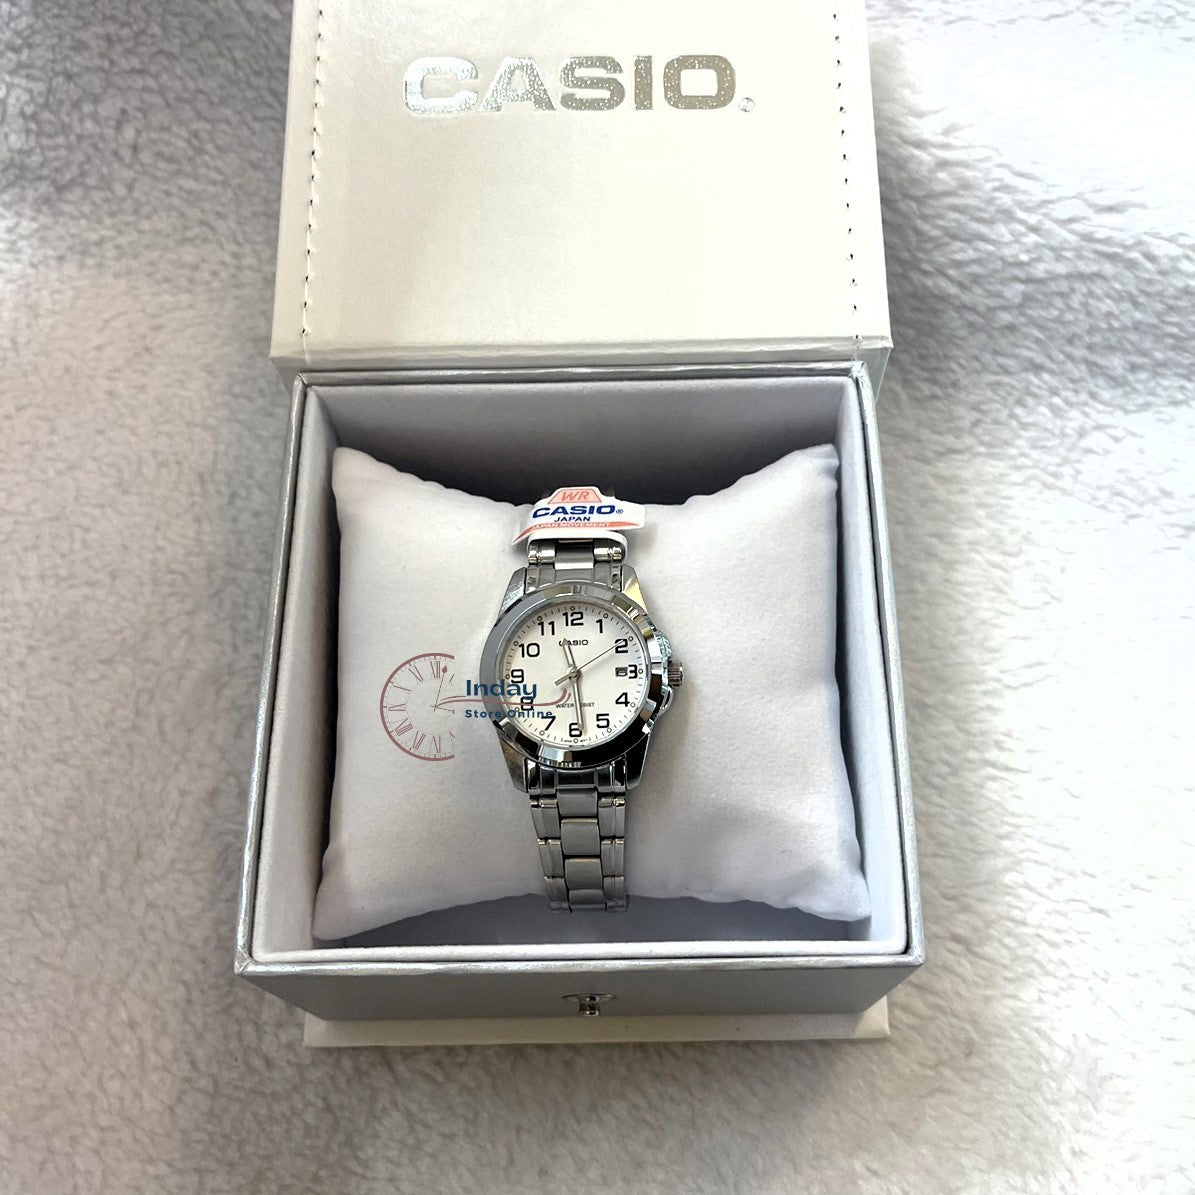 Casio Fashion Women's Watch LTP-1215A-7B2 Silver Stainless Steel Band